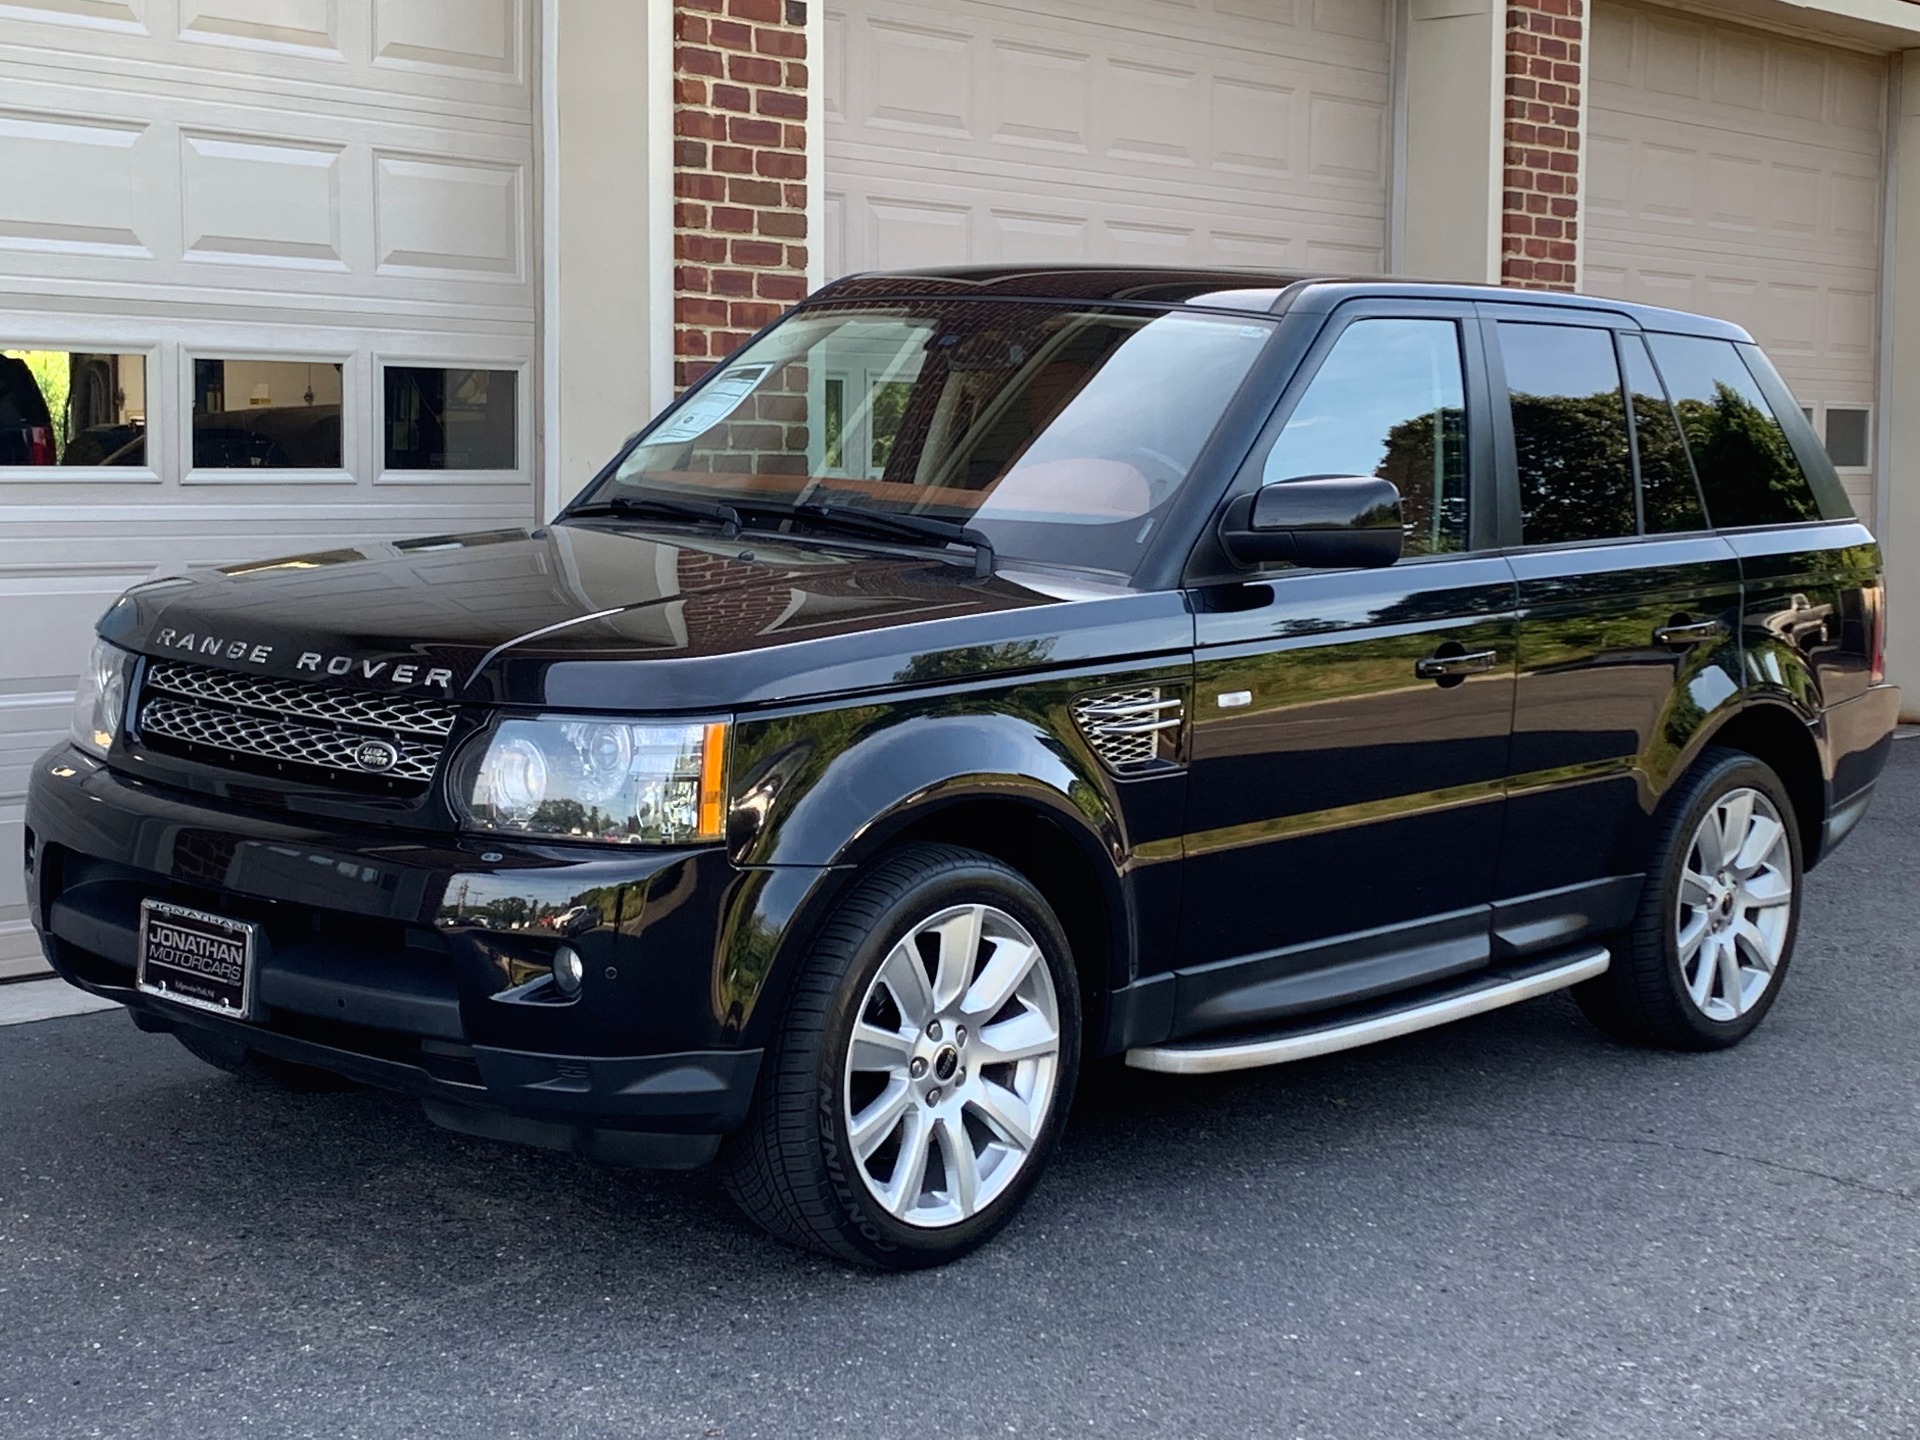 2013 Land Rover Range Rover Sport HSE LUX Stock # 773454 for sale near